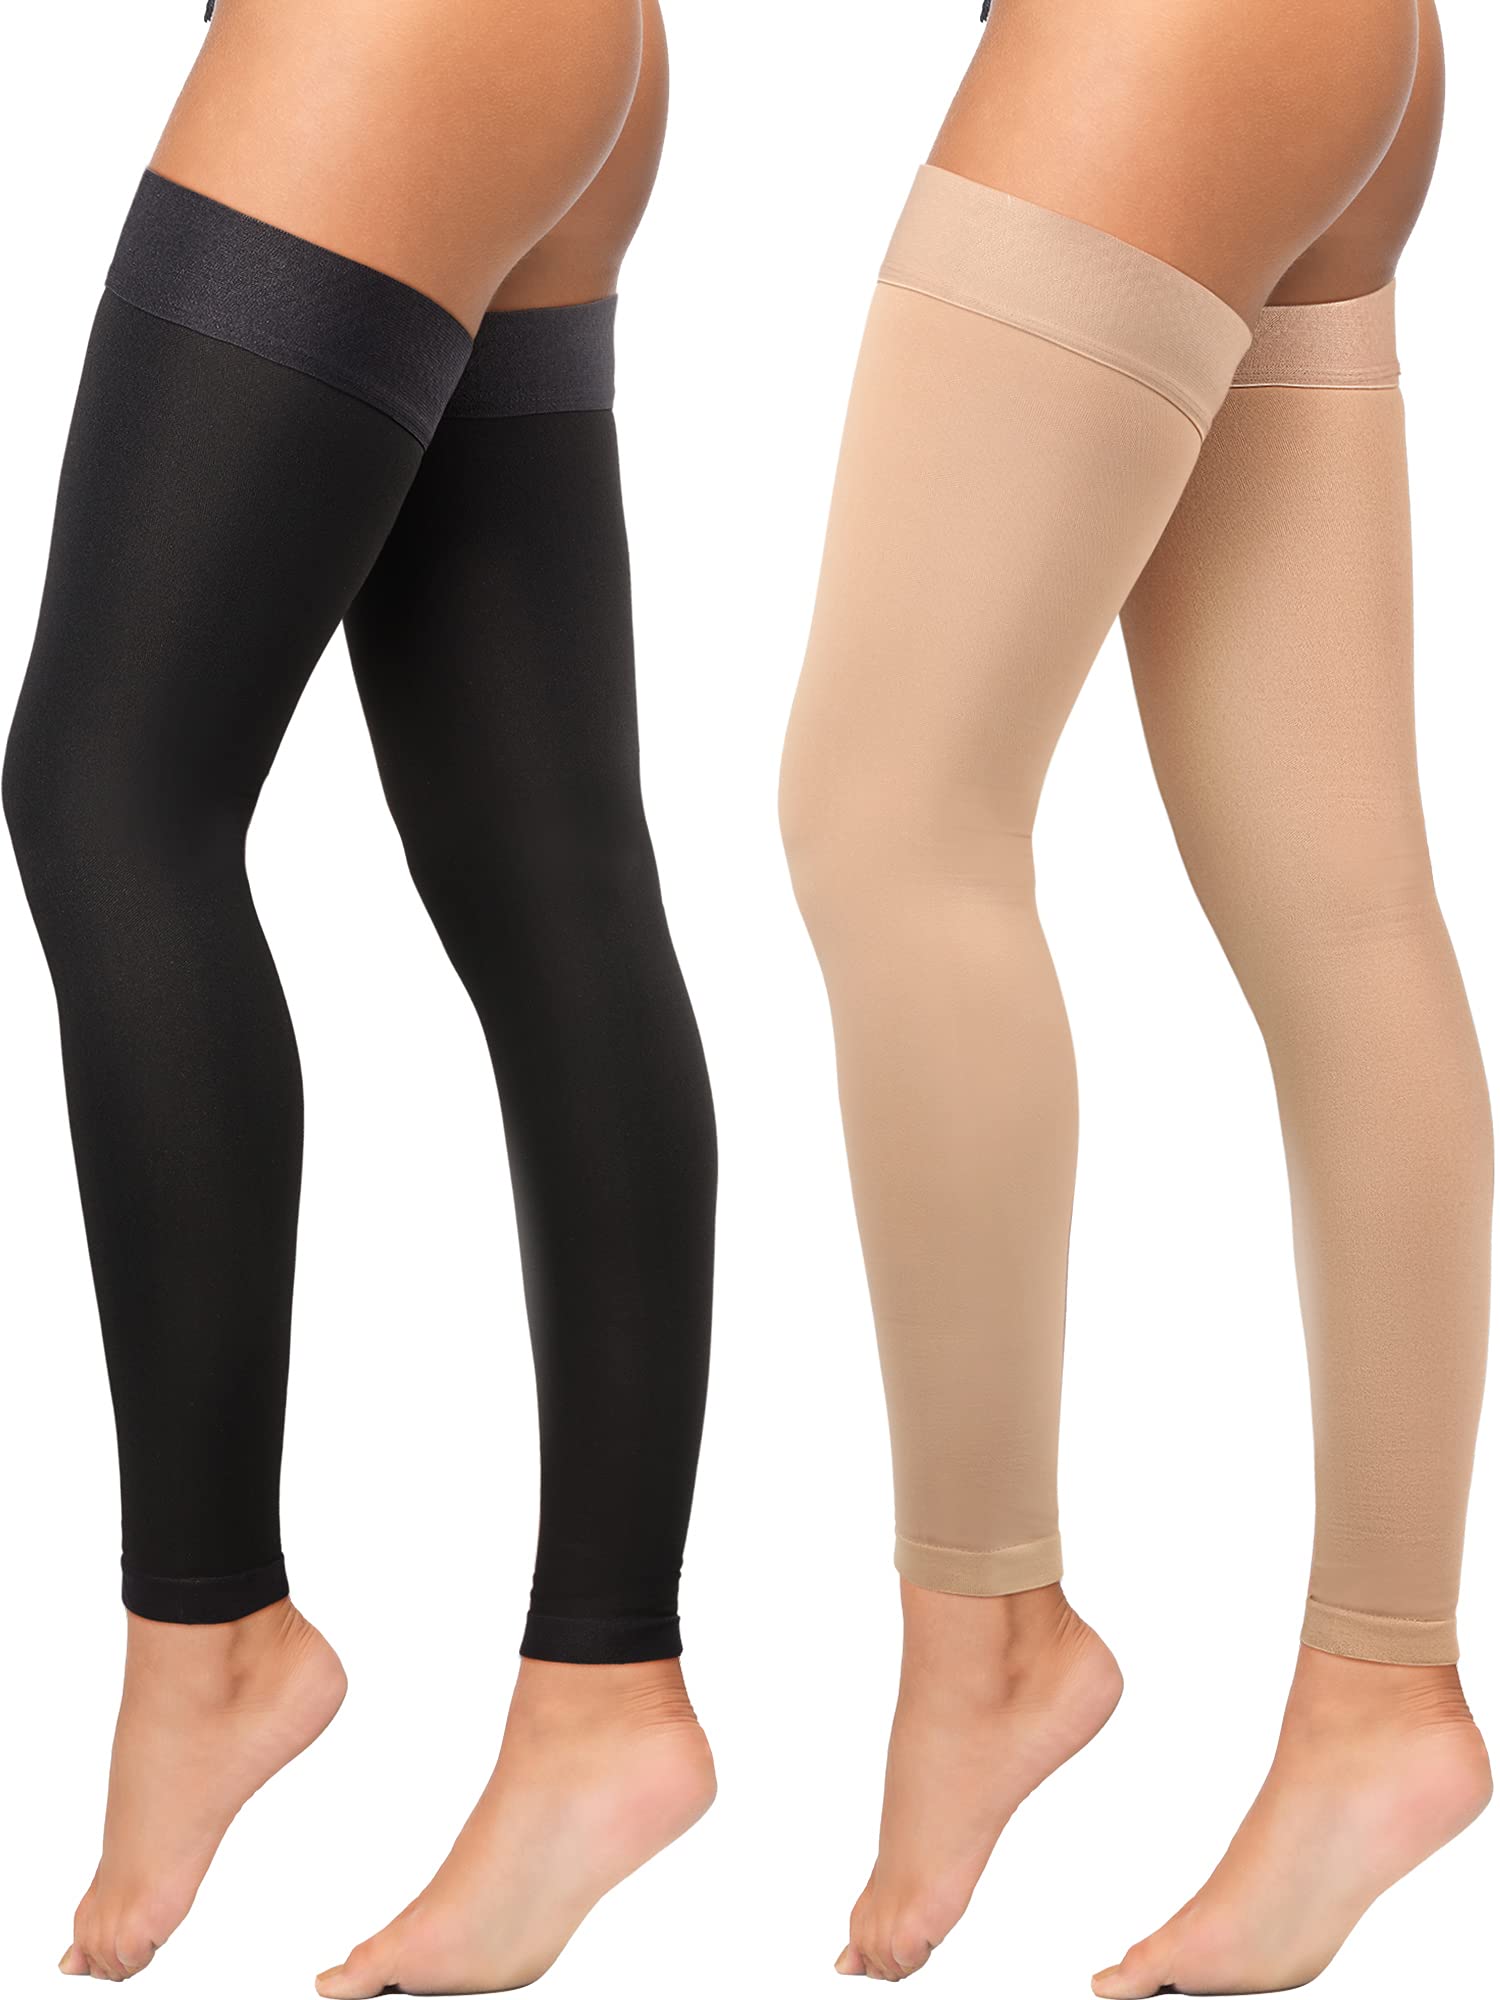 2 Pairs Thigh High Compression Stockings Footless 20-30 mmHg